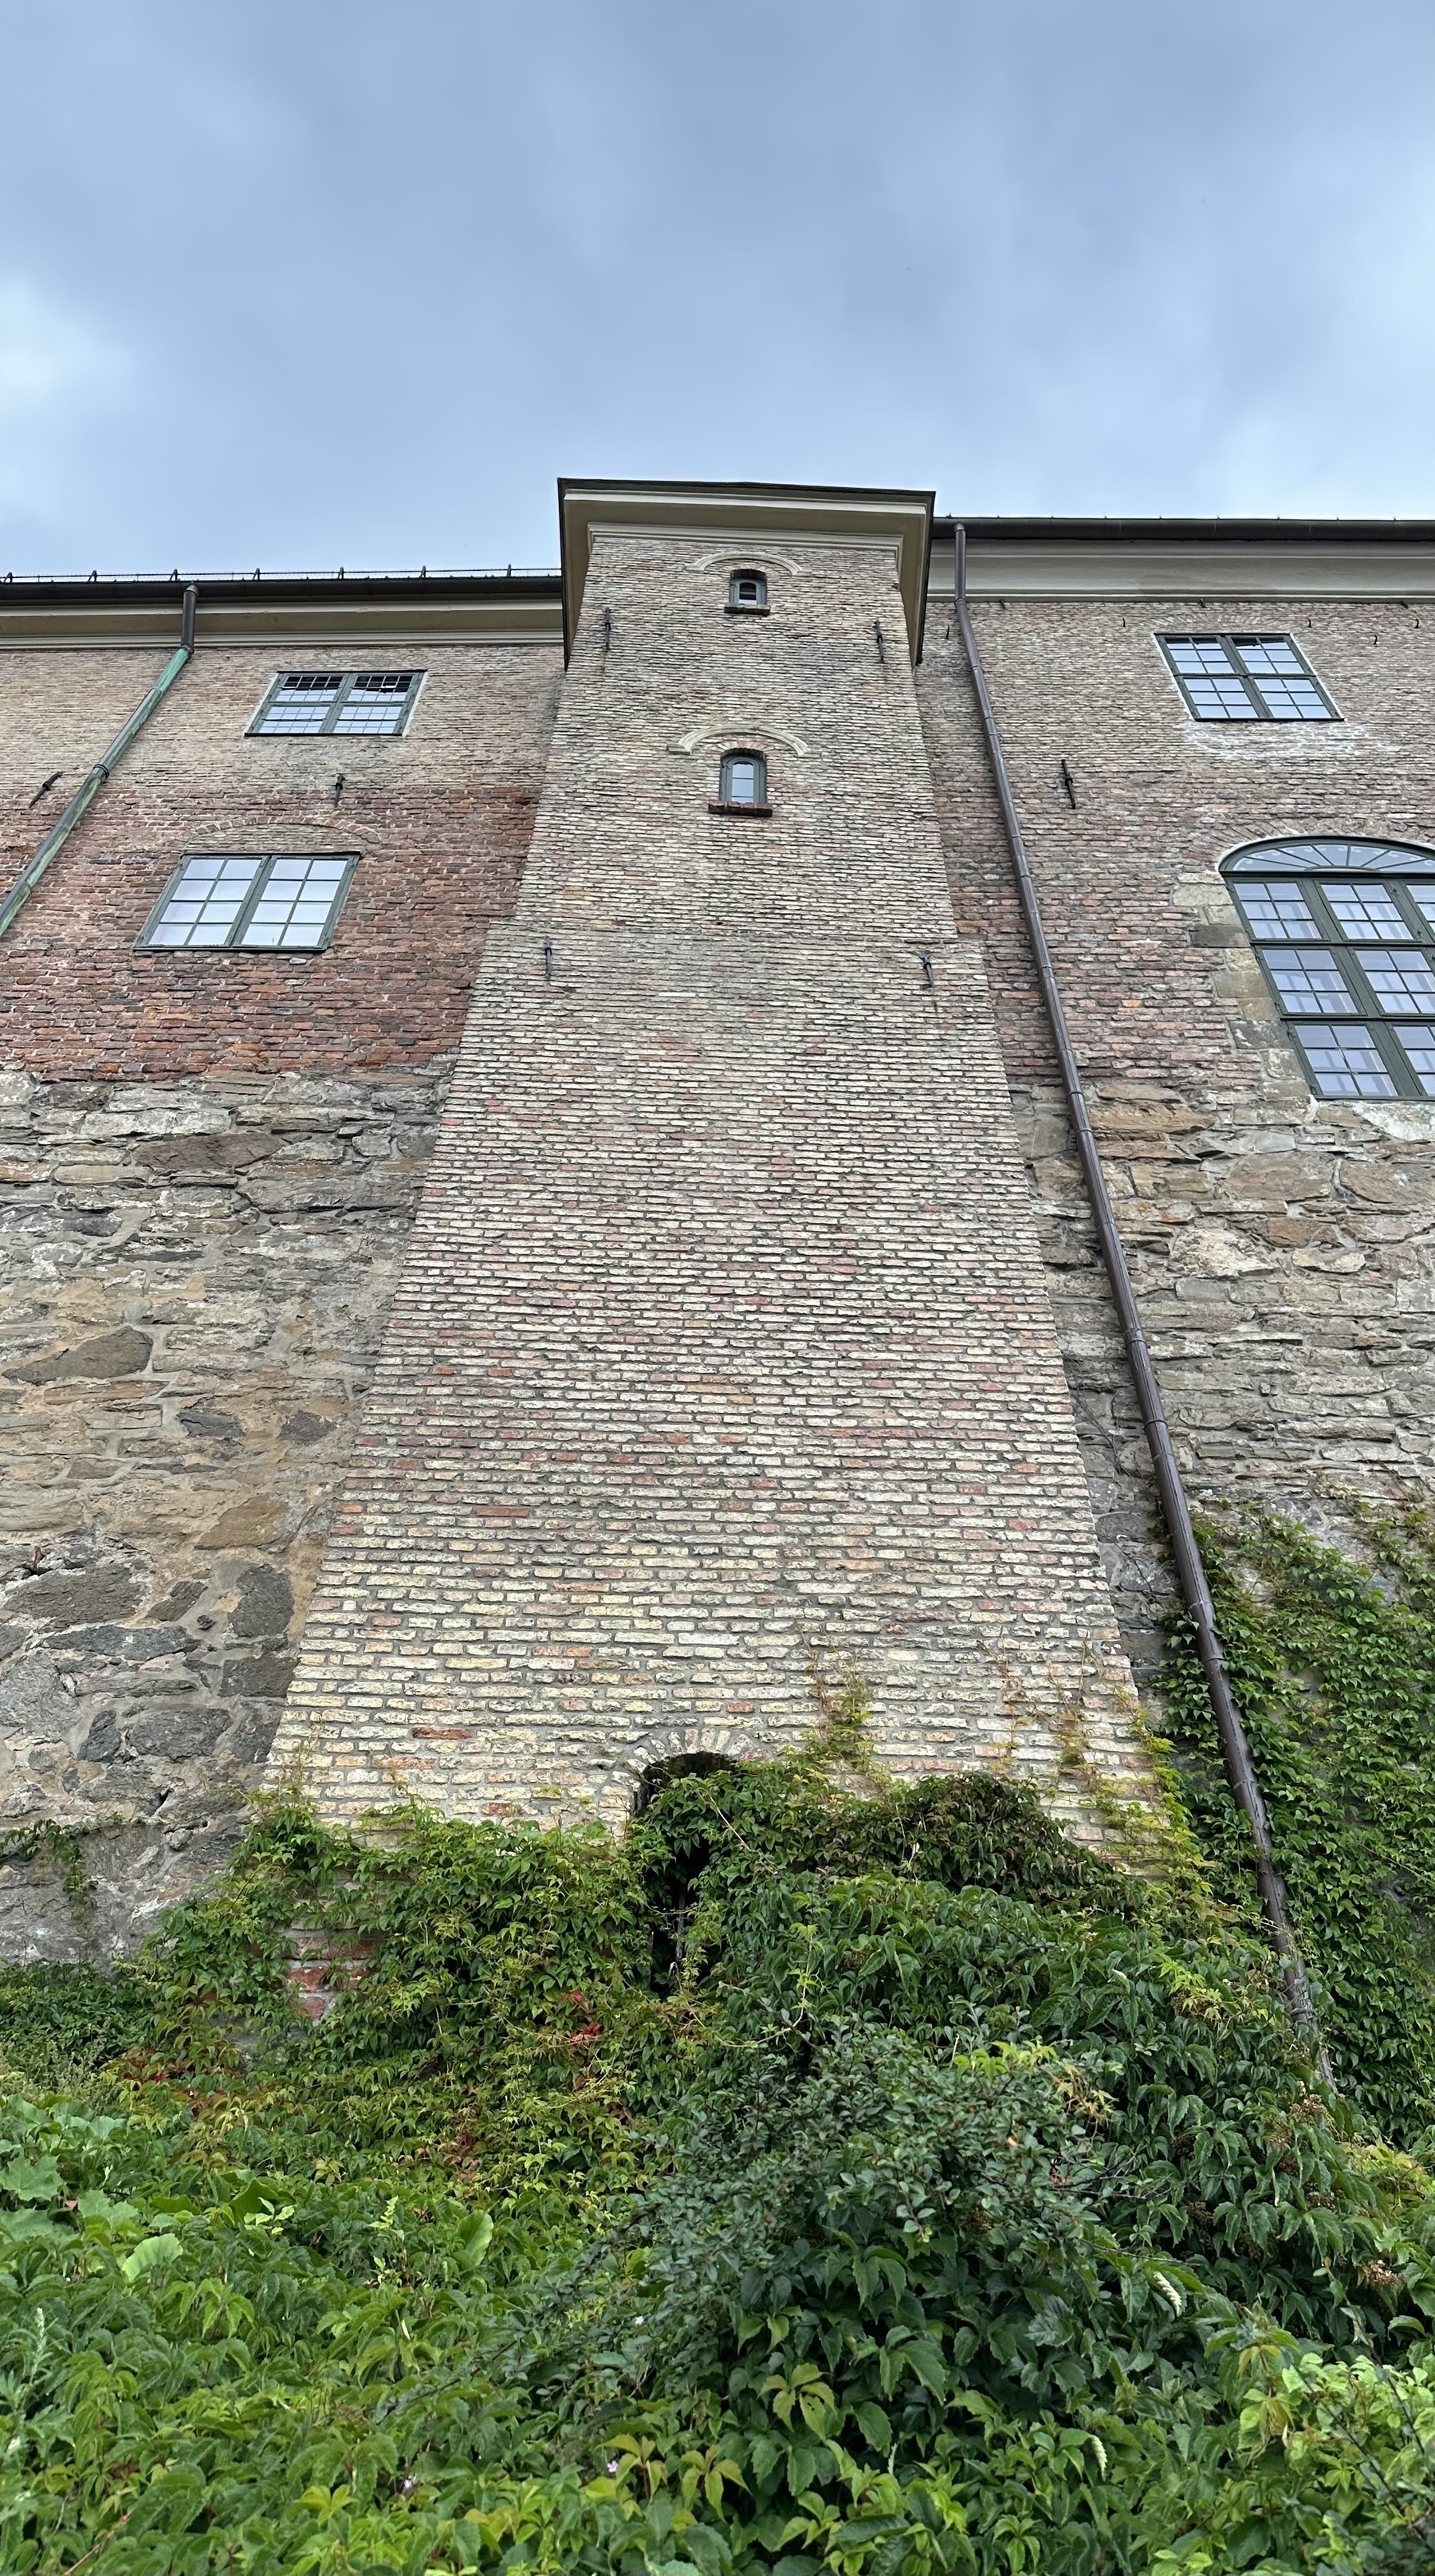 Looking up at Akershus fortress in Oslo. Foliage at the bottom, then brickwork growing out of that, reaching up in to a cloudy sky.